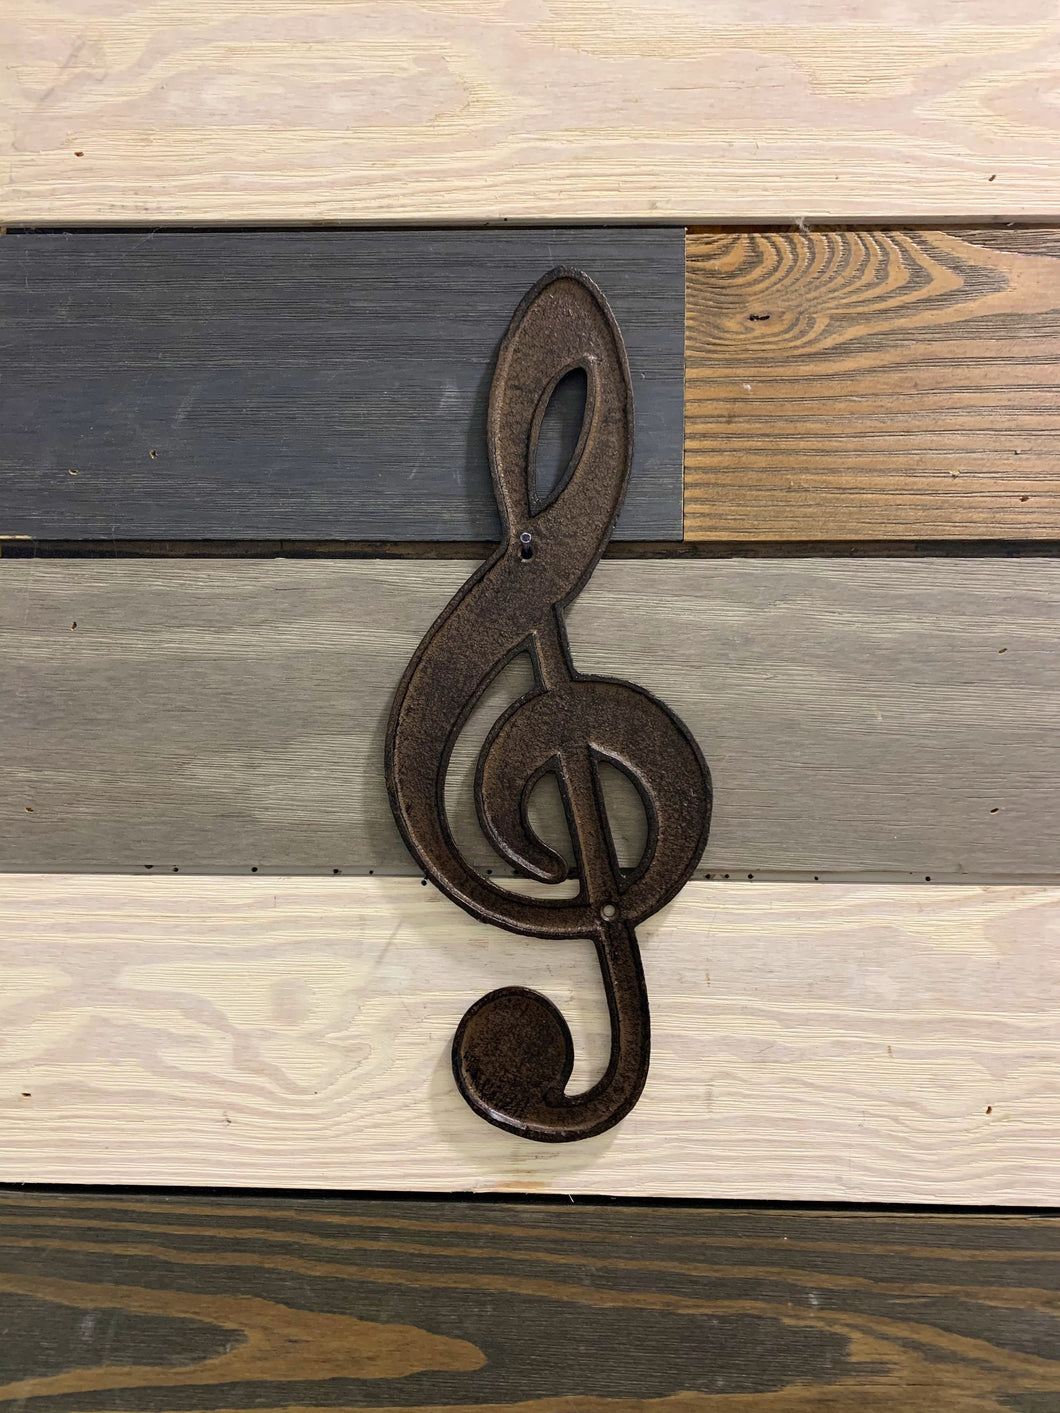 Large Music Note Cast Iron, Metal Music Note, Music Iron Note, Music Teacher Gift, Music Room Decor, Music Room Wall Art, Gift for musician